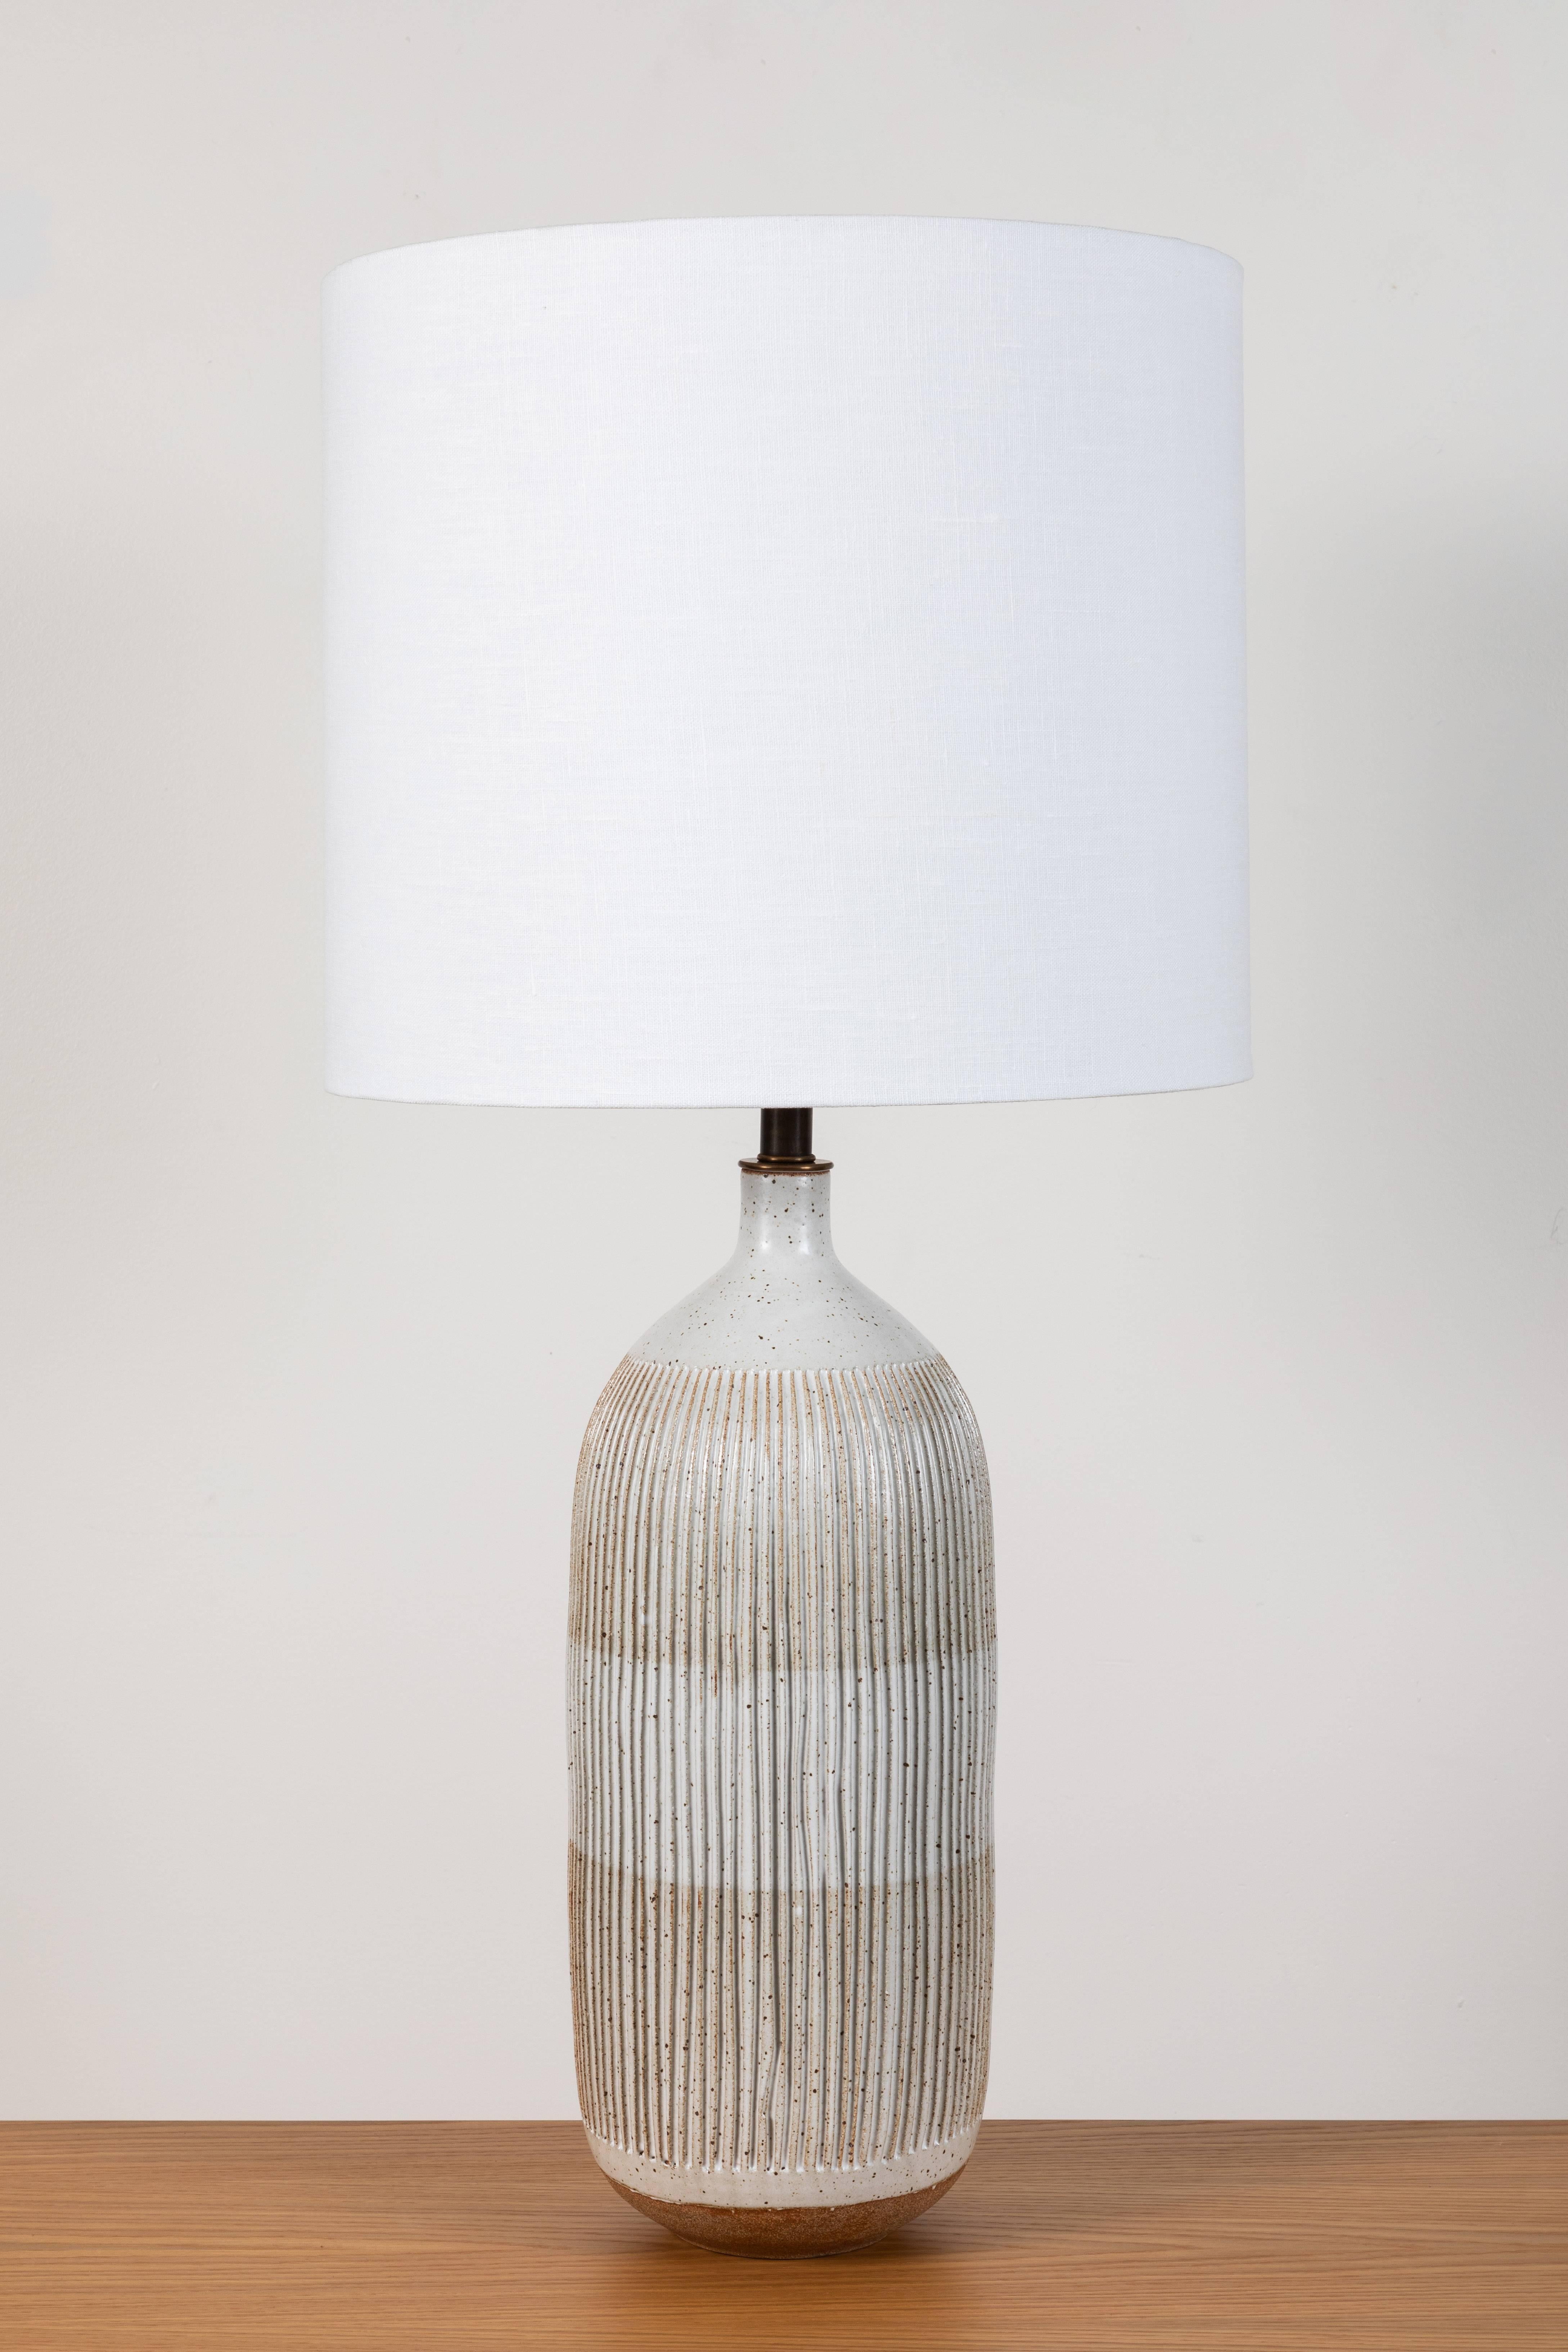 Pair of striped bottle lamps by Mt. Washington for Lawson-Fenning.
 